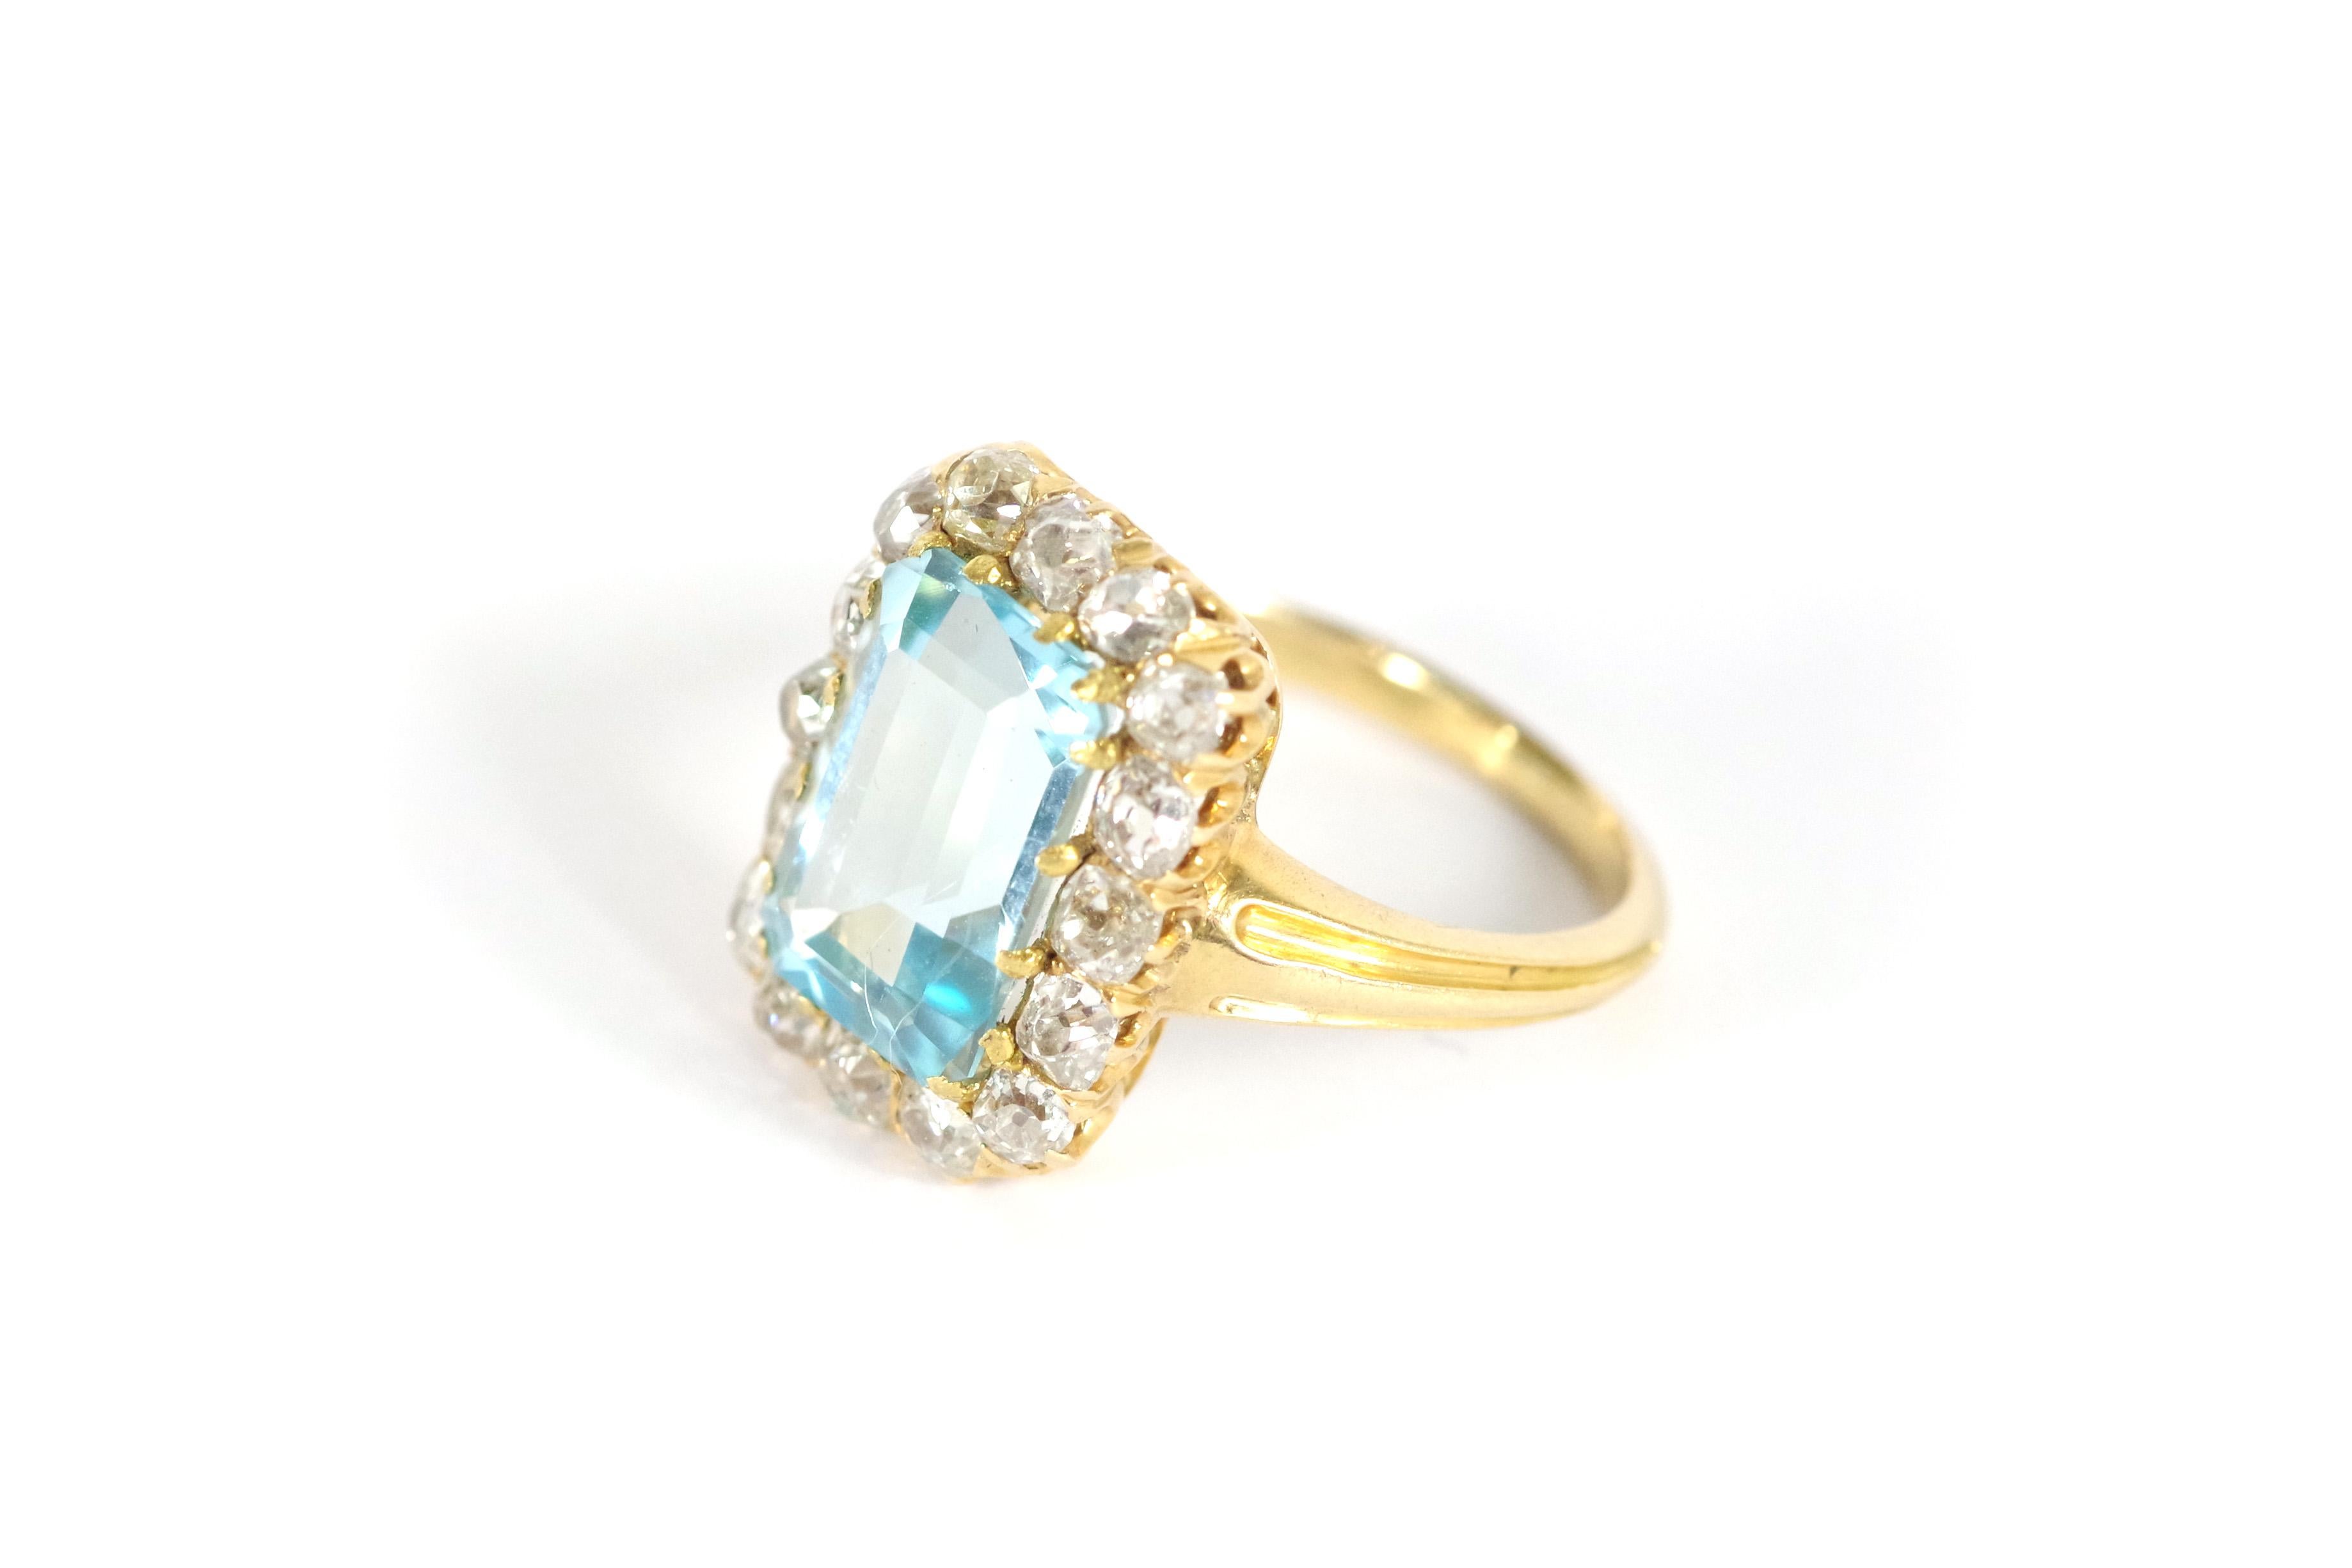 Blue topaz diamond ring in 18 karat yellow gold. Antique ring with a large rectangular-cut ice blue topaz in a setting of 16 old-cut diamonds. The stone has a lovely crystalline blue color very similar to an aquamarine stone. Antique cluster ring